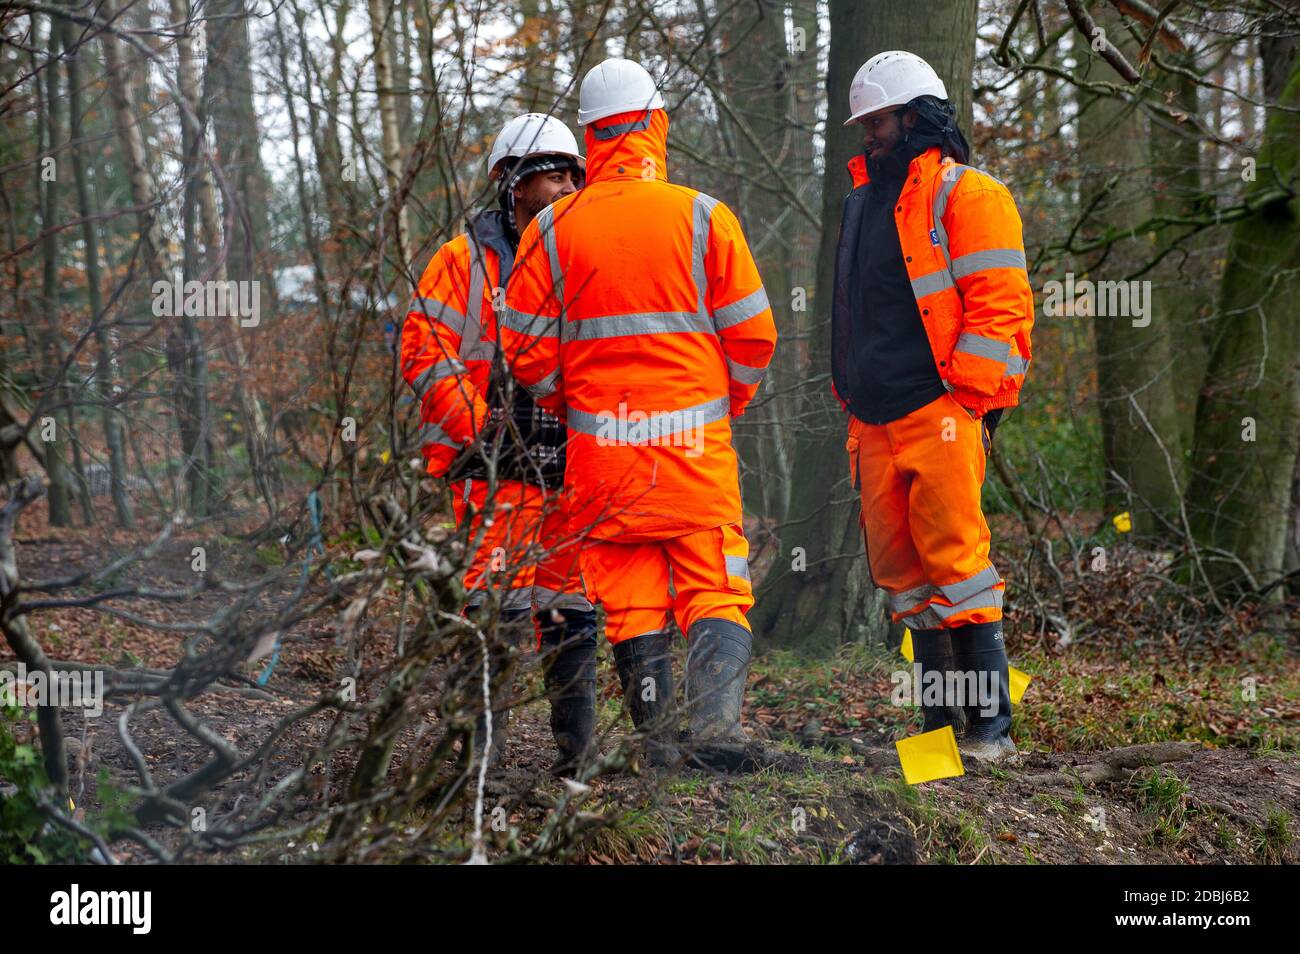 Aylesbury Vale, Buckinghamshire, UK. 17th November, 2020. HS2 workers ignoring social distancing. The Woodland Trust have issued a press release asking for an immediate pause on work at the wood to said that they have “grave concerns” that ancient woodland due for imminent destruction by HS2 Ltd might be felled without proper survey work to identify bat roosts, and without the proper licences required by law. Credit: Maureen McLean/Alamy Live News Stock Photo